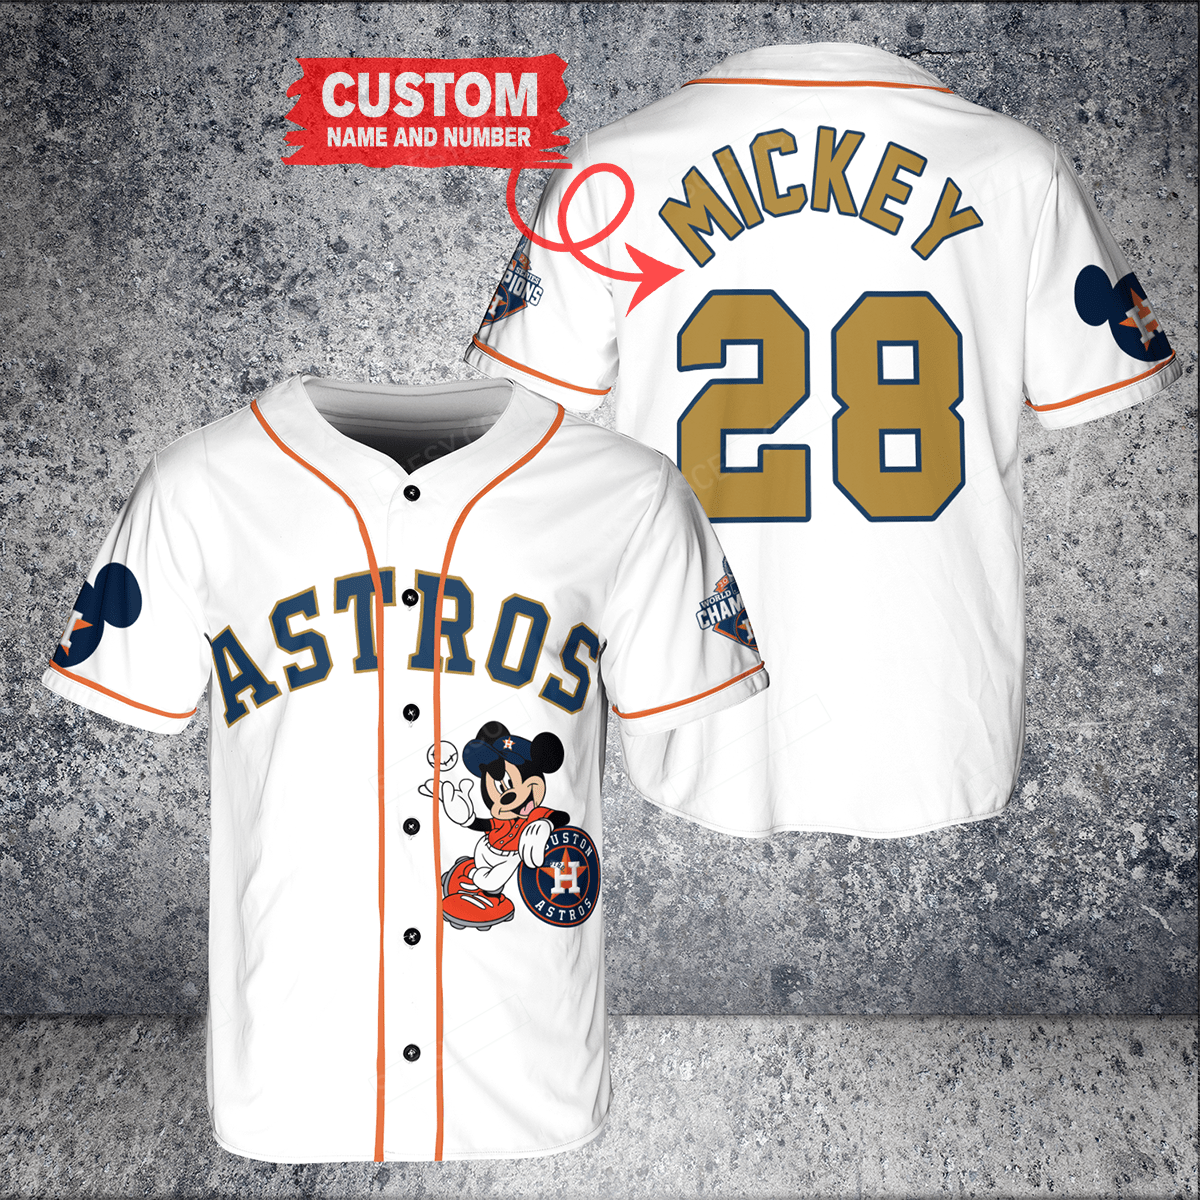 astros champions jersey